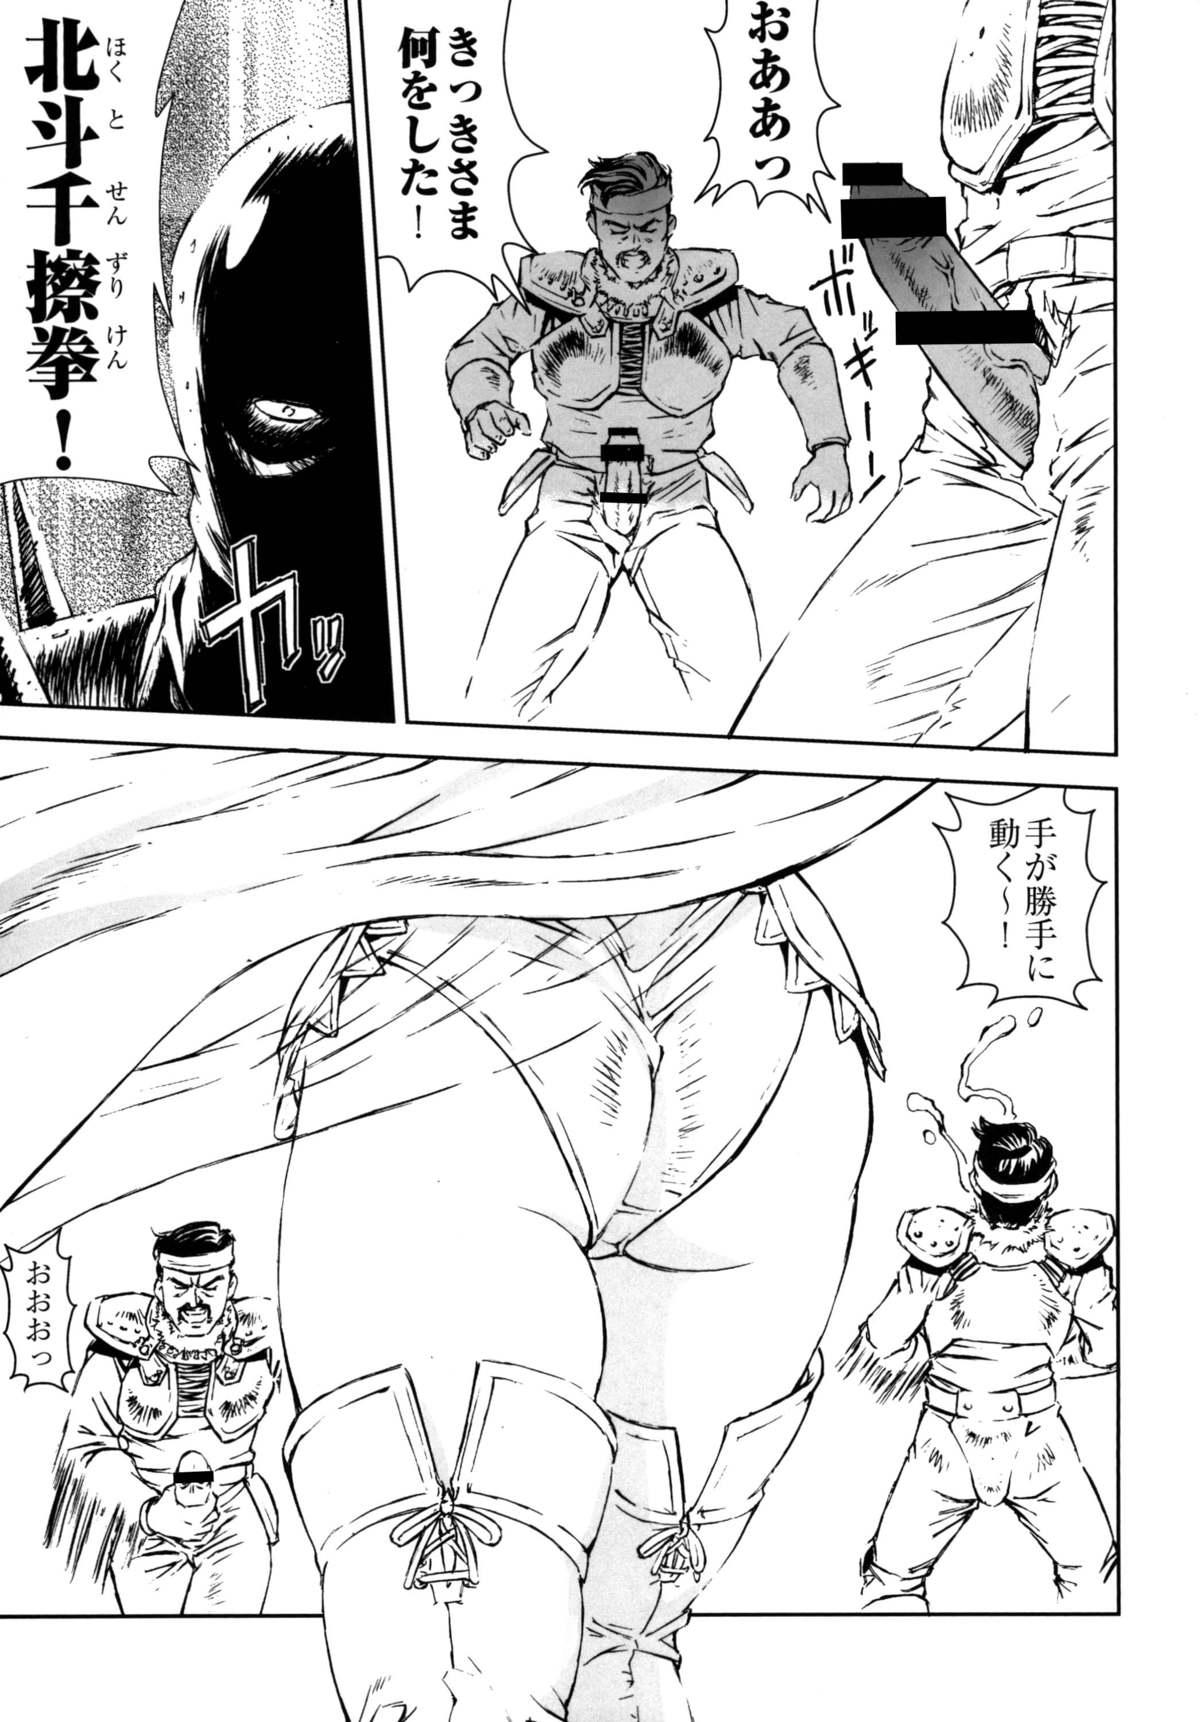 Straight Porn HOT BITCH JUMP 2 - Kochikame Fist of the north star Amateurs - Page 6